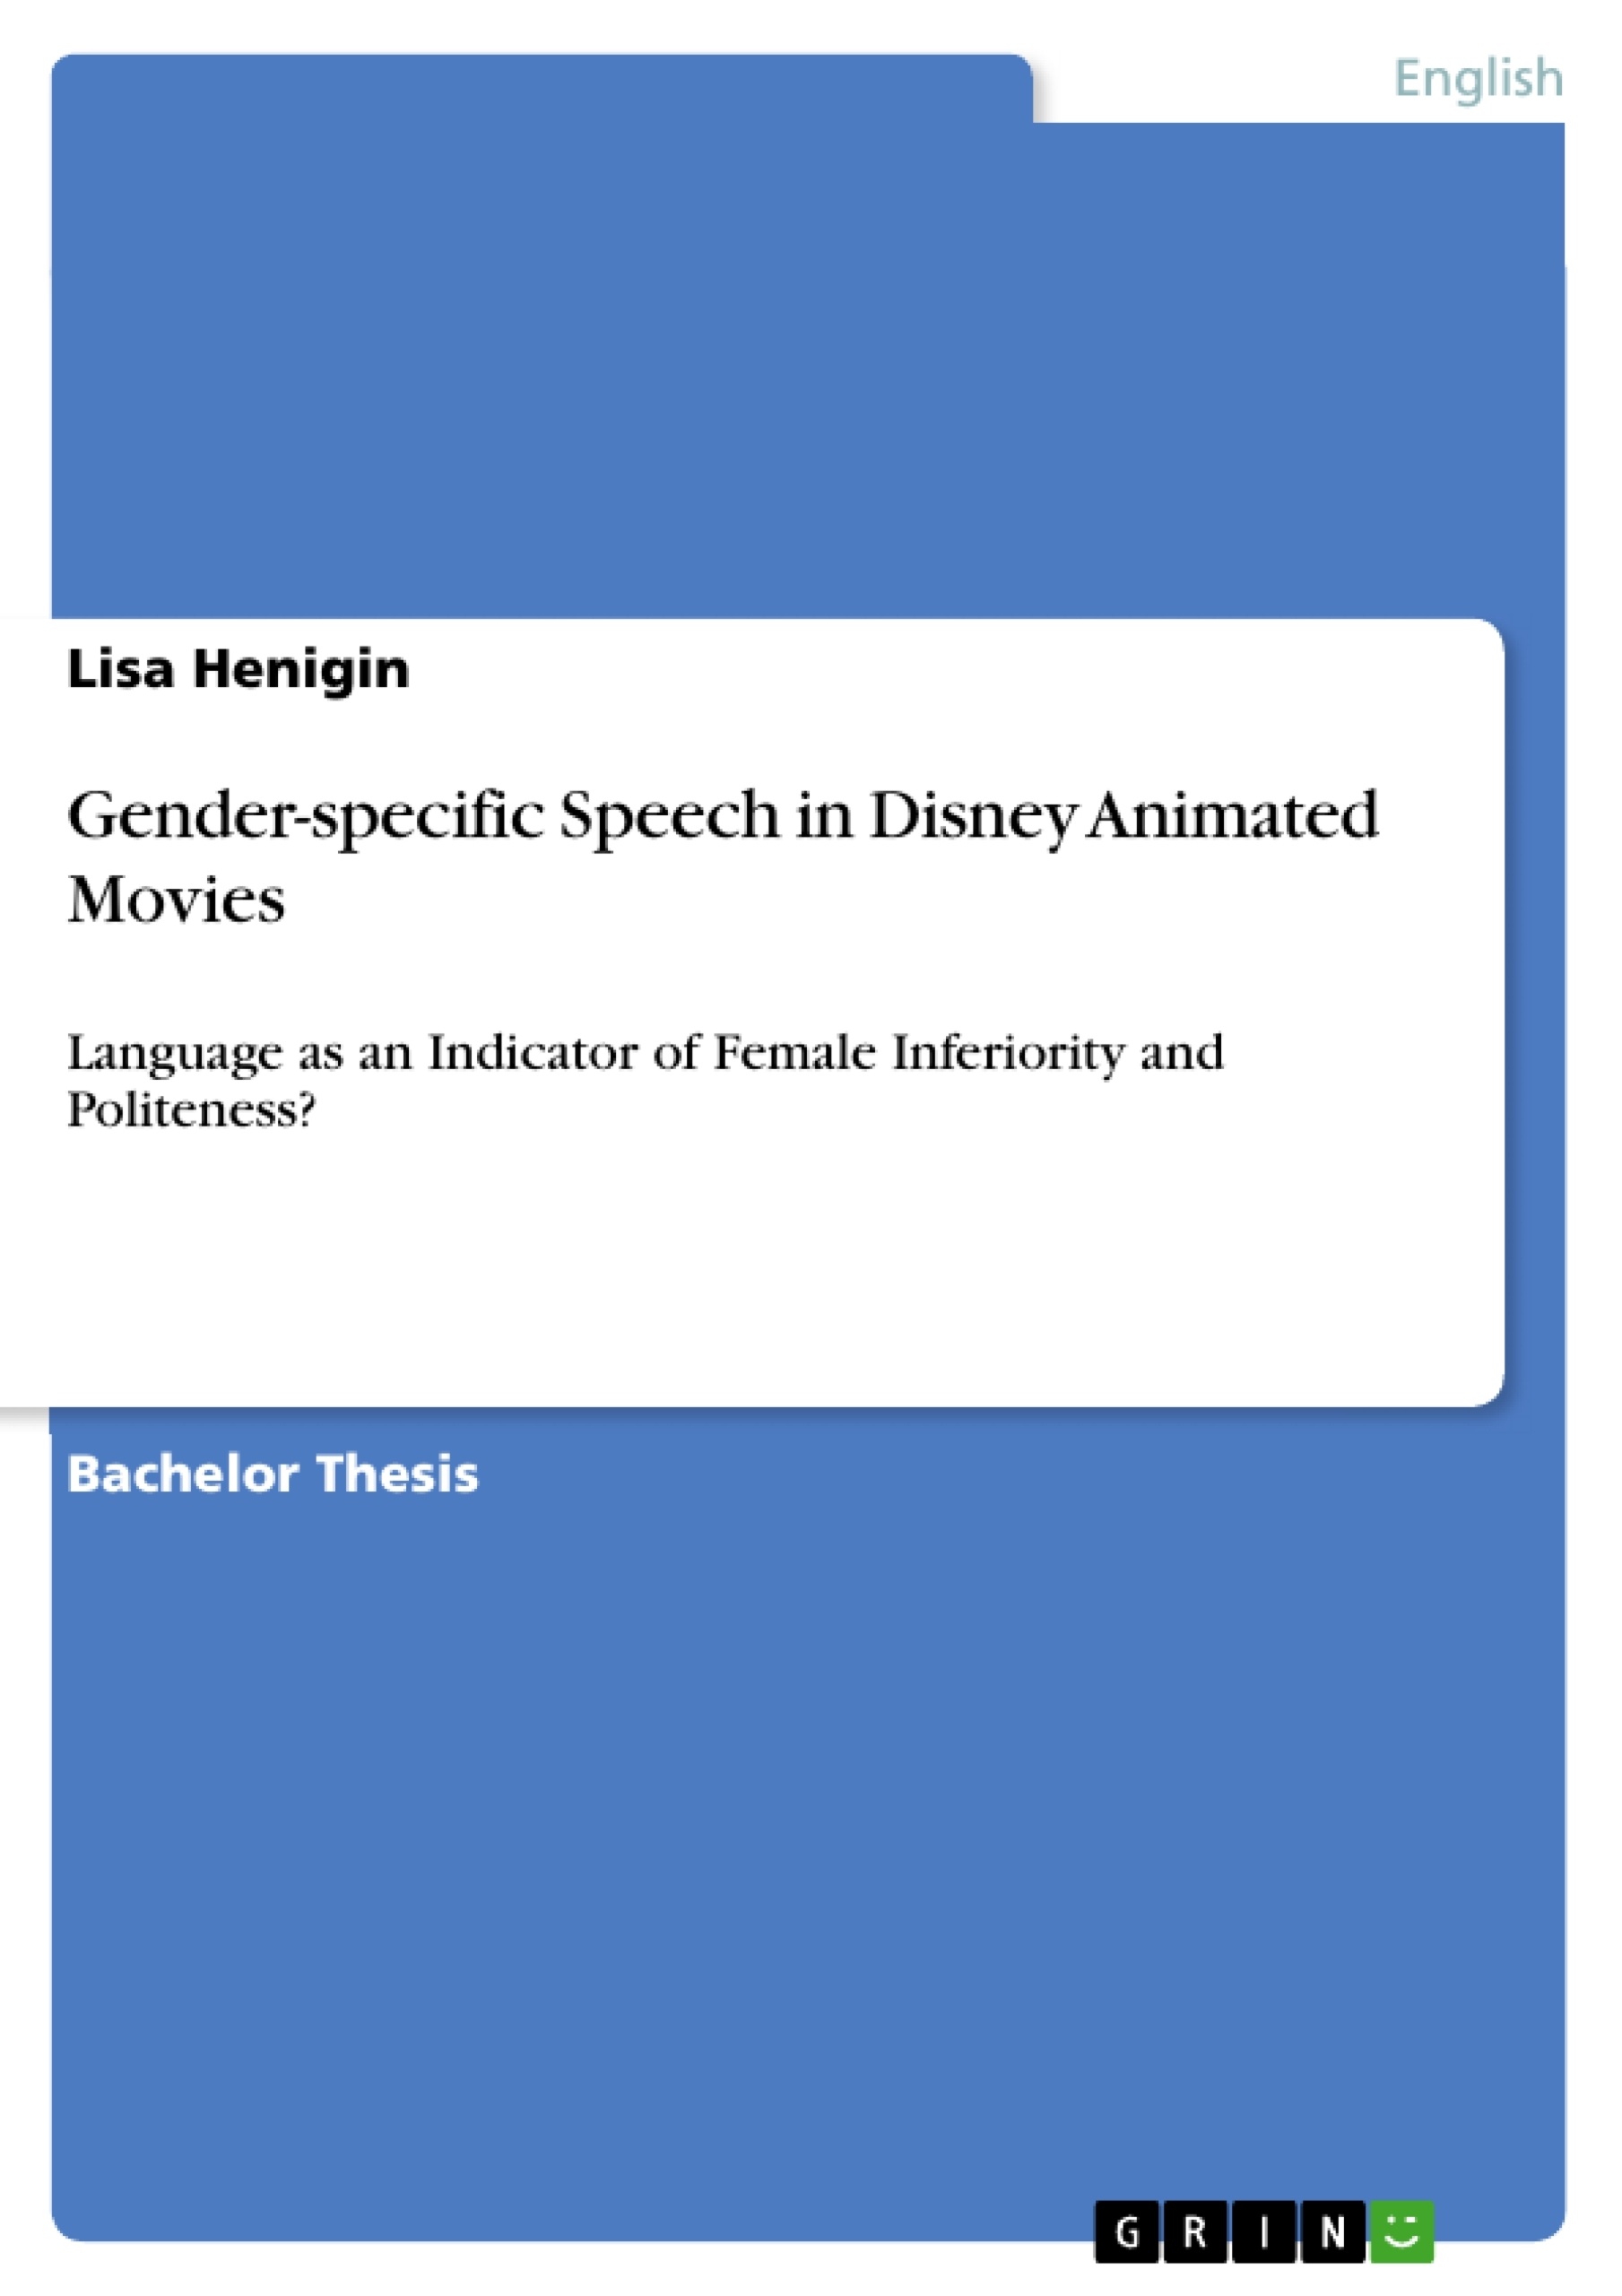 Title: Gender-specific Speech in Disney Animated Movies